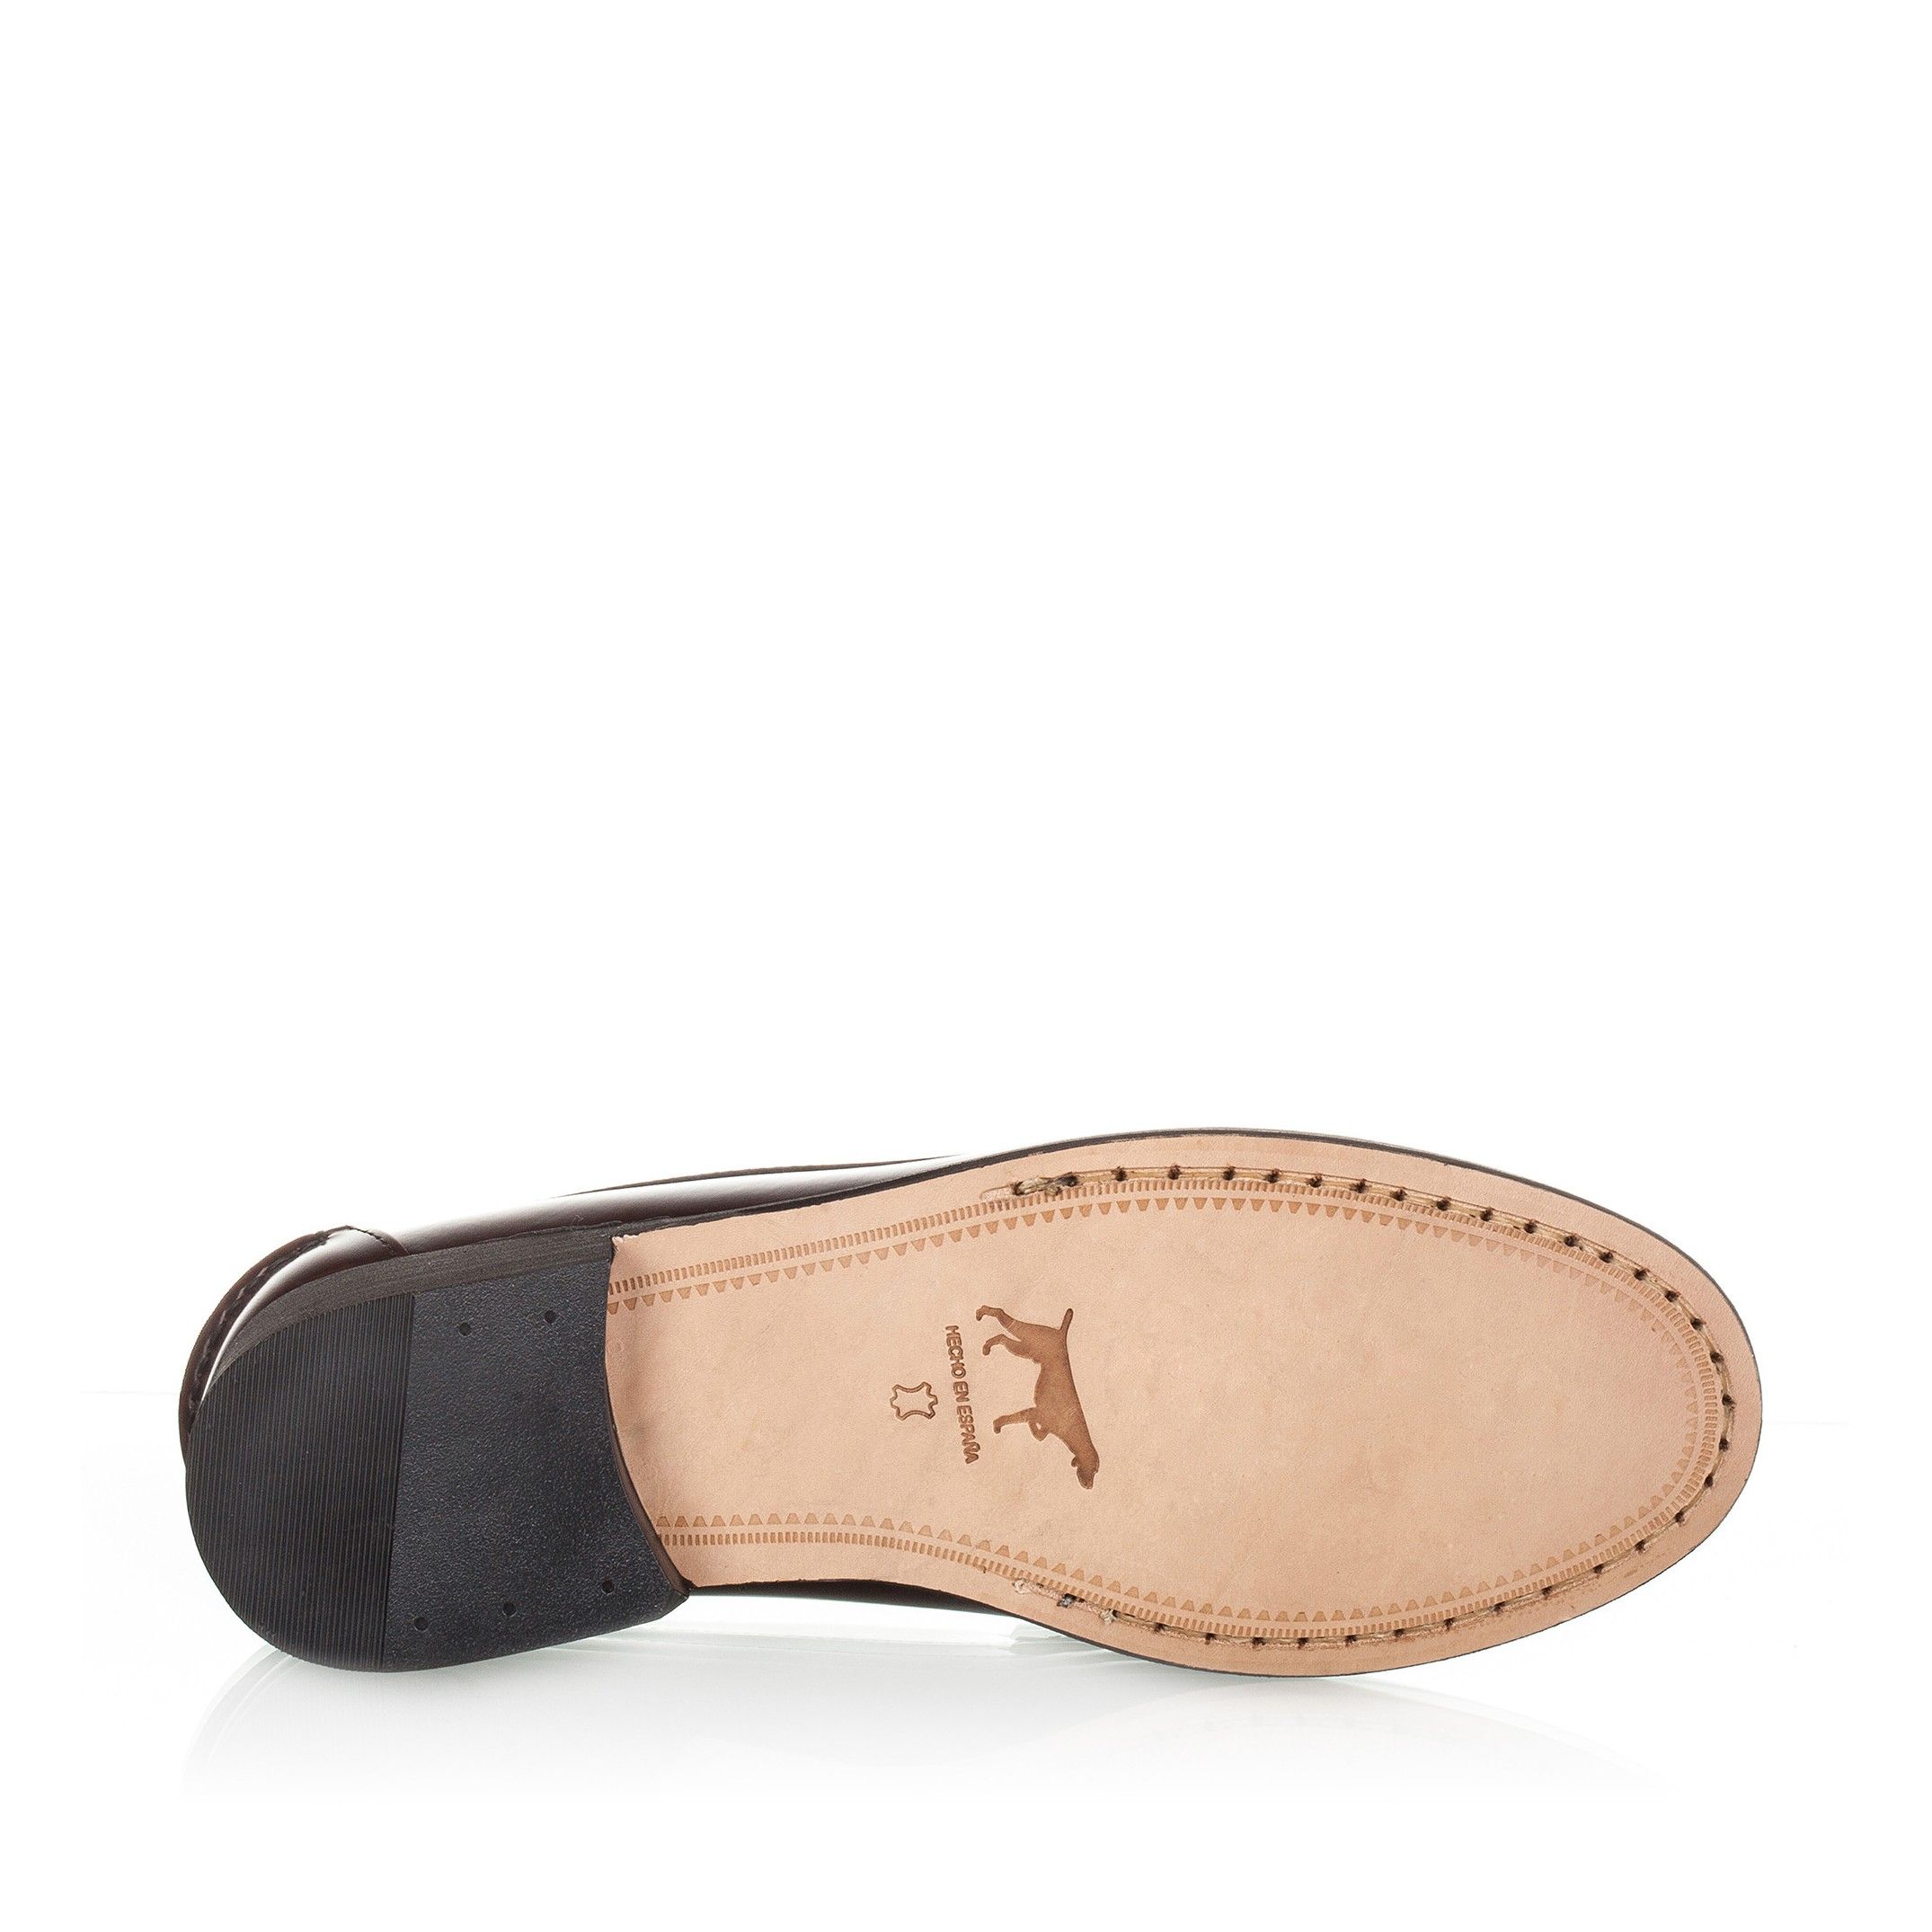 The most daring model of the classics. Leather moccasin with tassels in the center to show off in formal events and even informal ones, for example, with skinny trousers. Upper, inner and insole made of florentic leather. Leather sole sewn. Spanish product made with quality materials. In burgundy, brown and black. To dress in summer and winter.